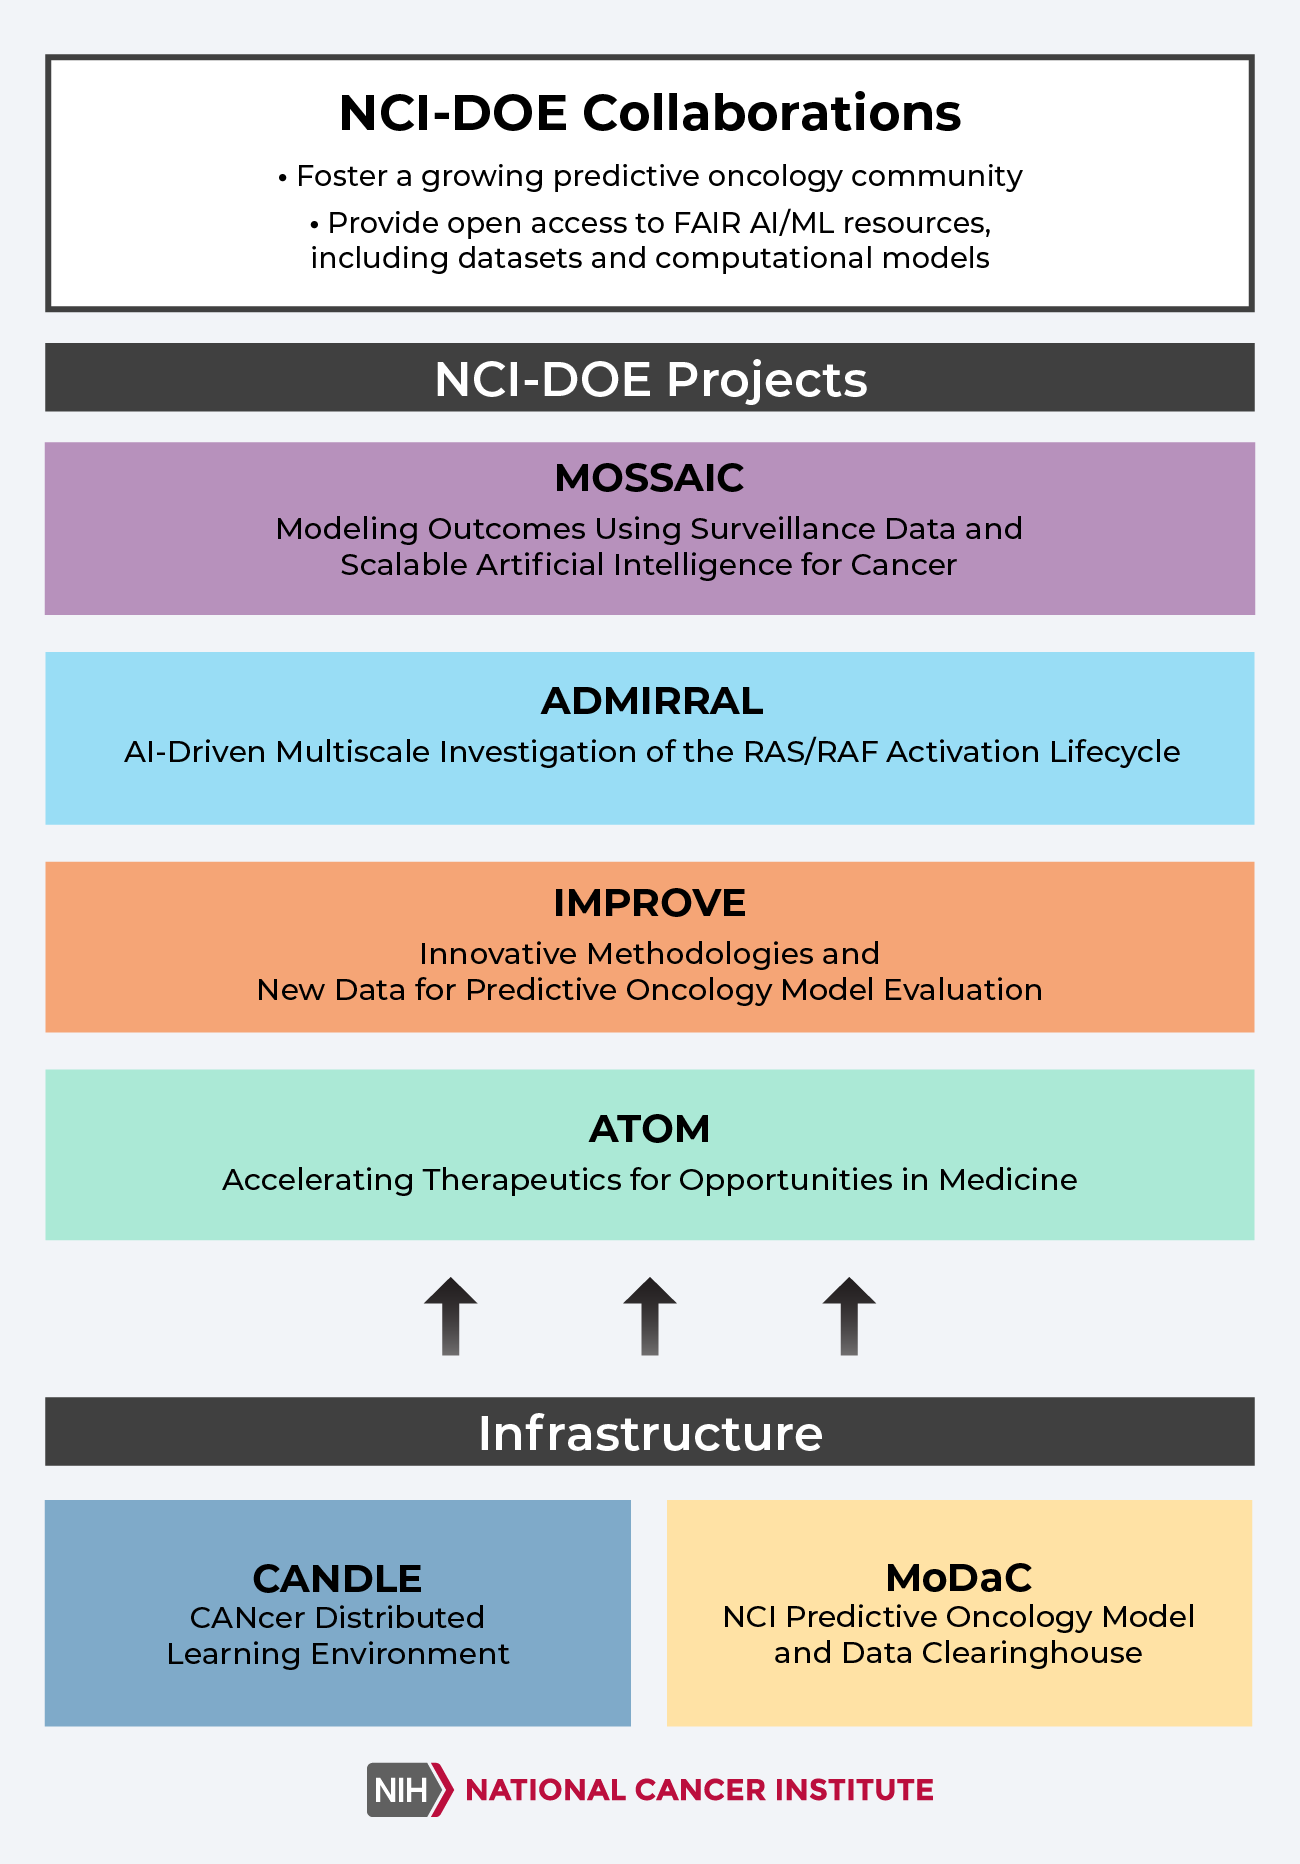 NCI-DOE Collaborations Foster a growing predictive oncology community and provide open access to FAIR AI/ML resoruces, including datasets and computational models. NCI-DOE Projects include MOSSAIC, ADMIRRAL, IMPROVE, and ATOM, each supported by infrastructure in the form of CANDLE (CANcer Distributed Learning Environment) and MoDaC (NCI Predictive Oncology Model and Data Clearinghouse).